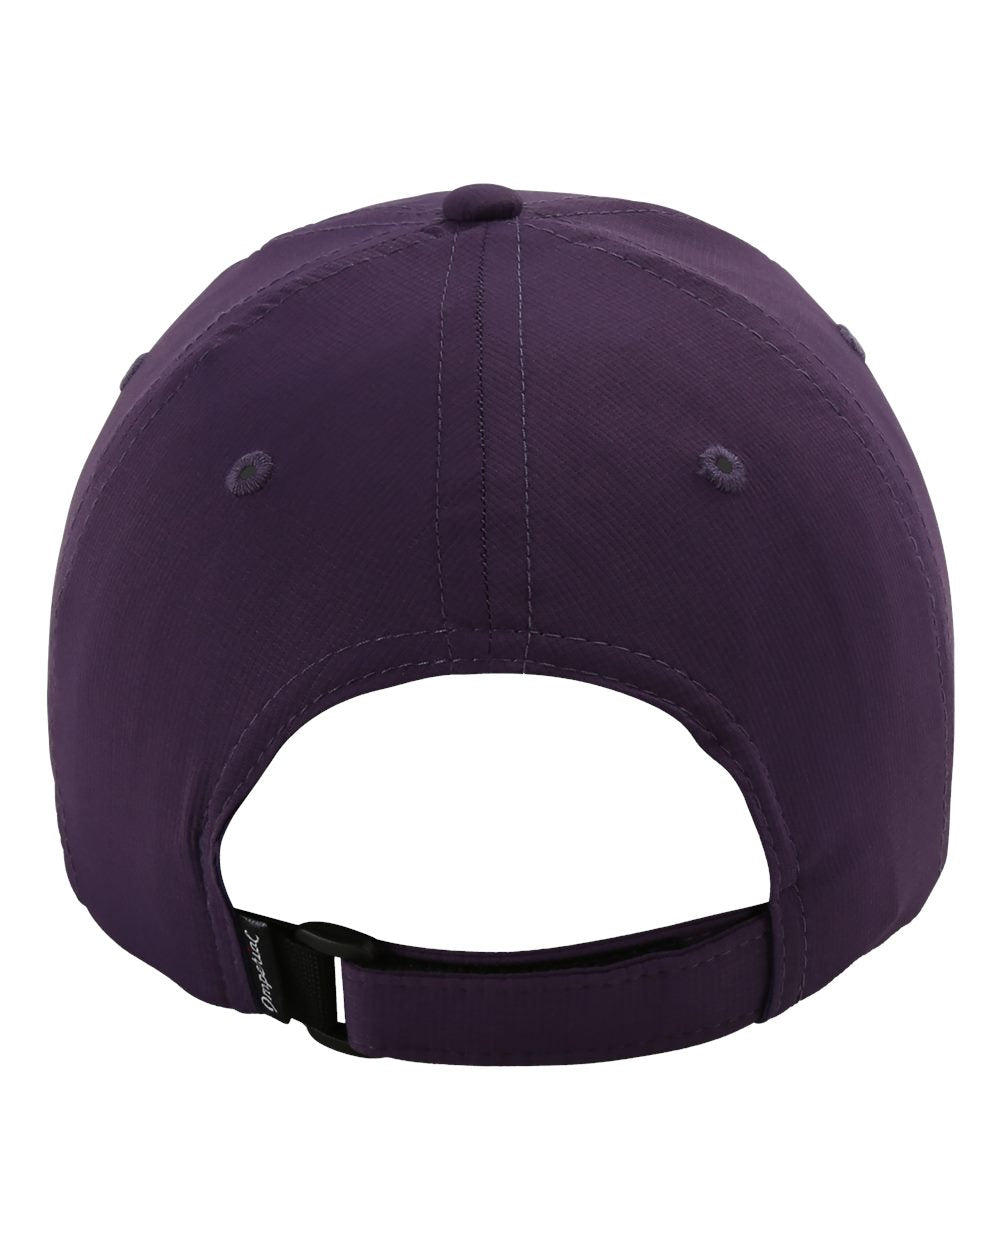 Back view of Imperial X210P custom hat in purple